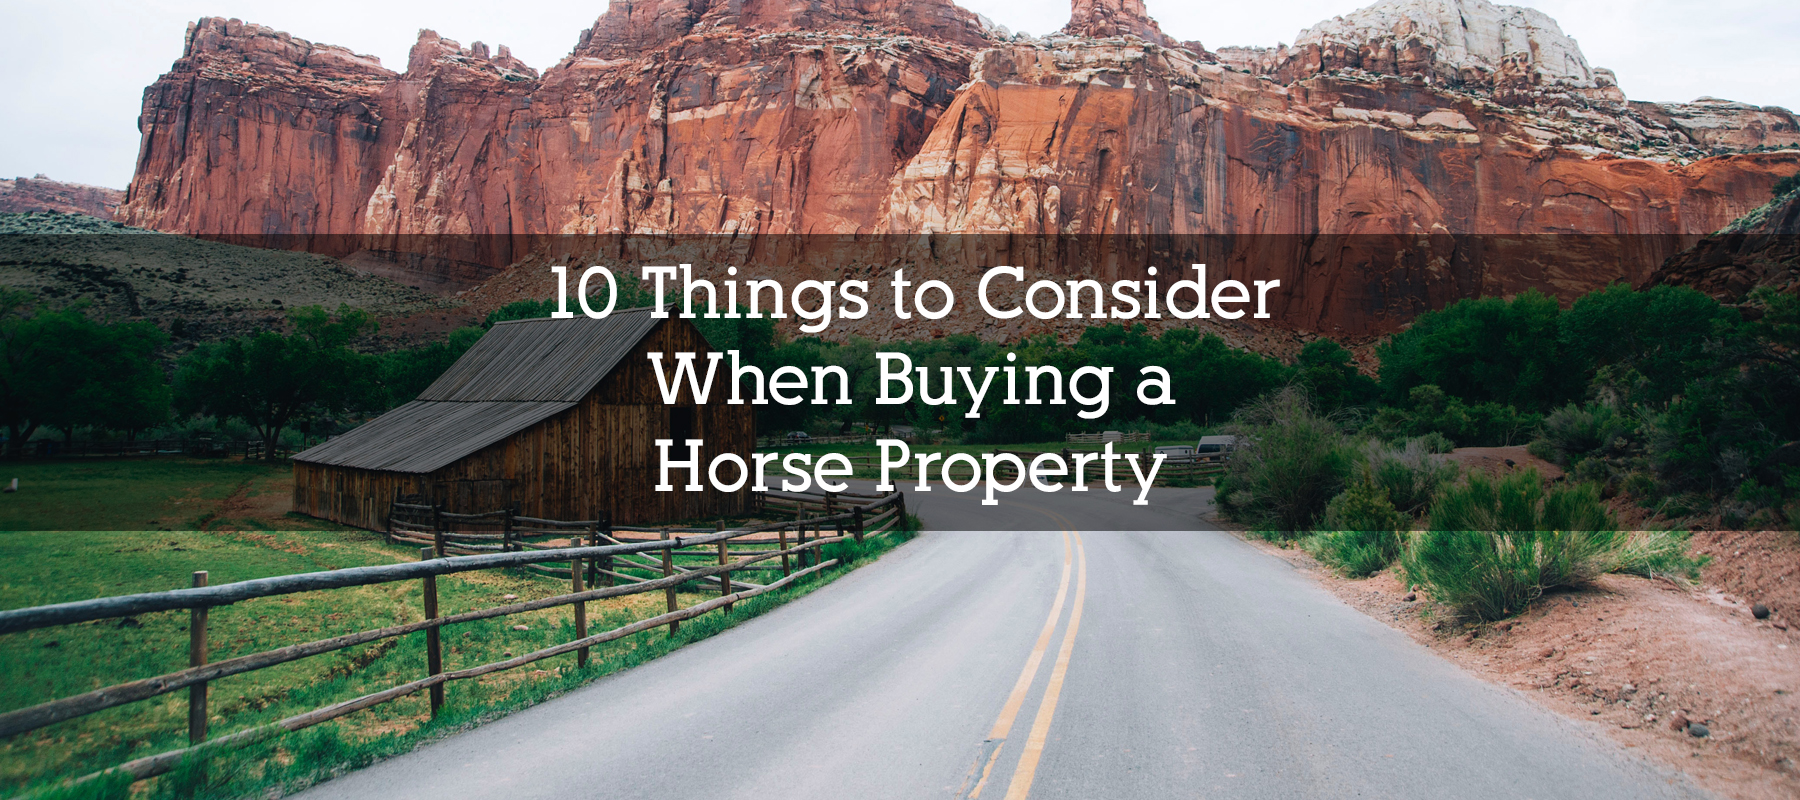 10 THINGS TO CONSIDER WHEN BUYING A HORSE PROPERTY IN COLORADO